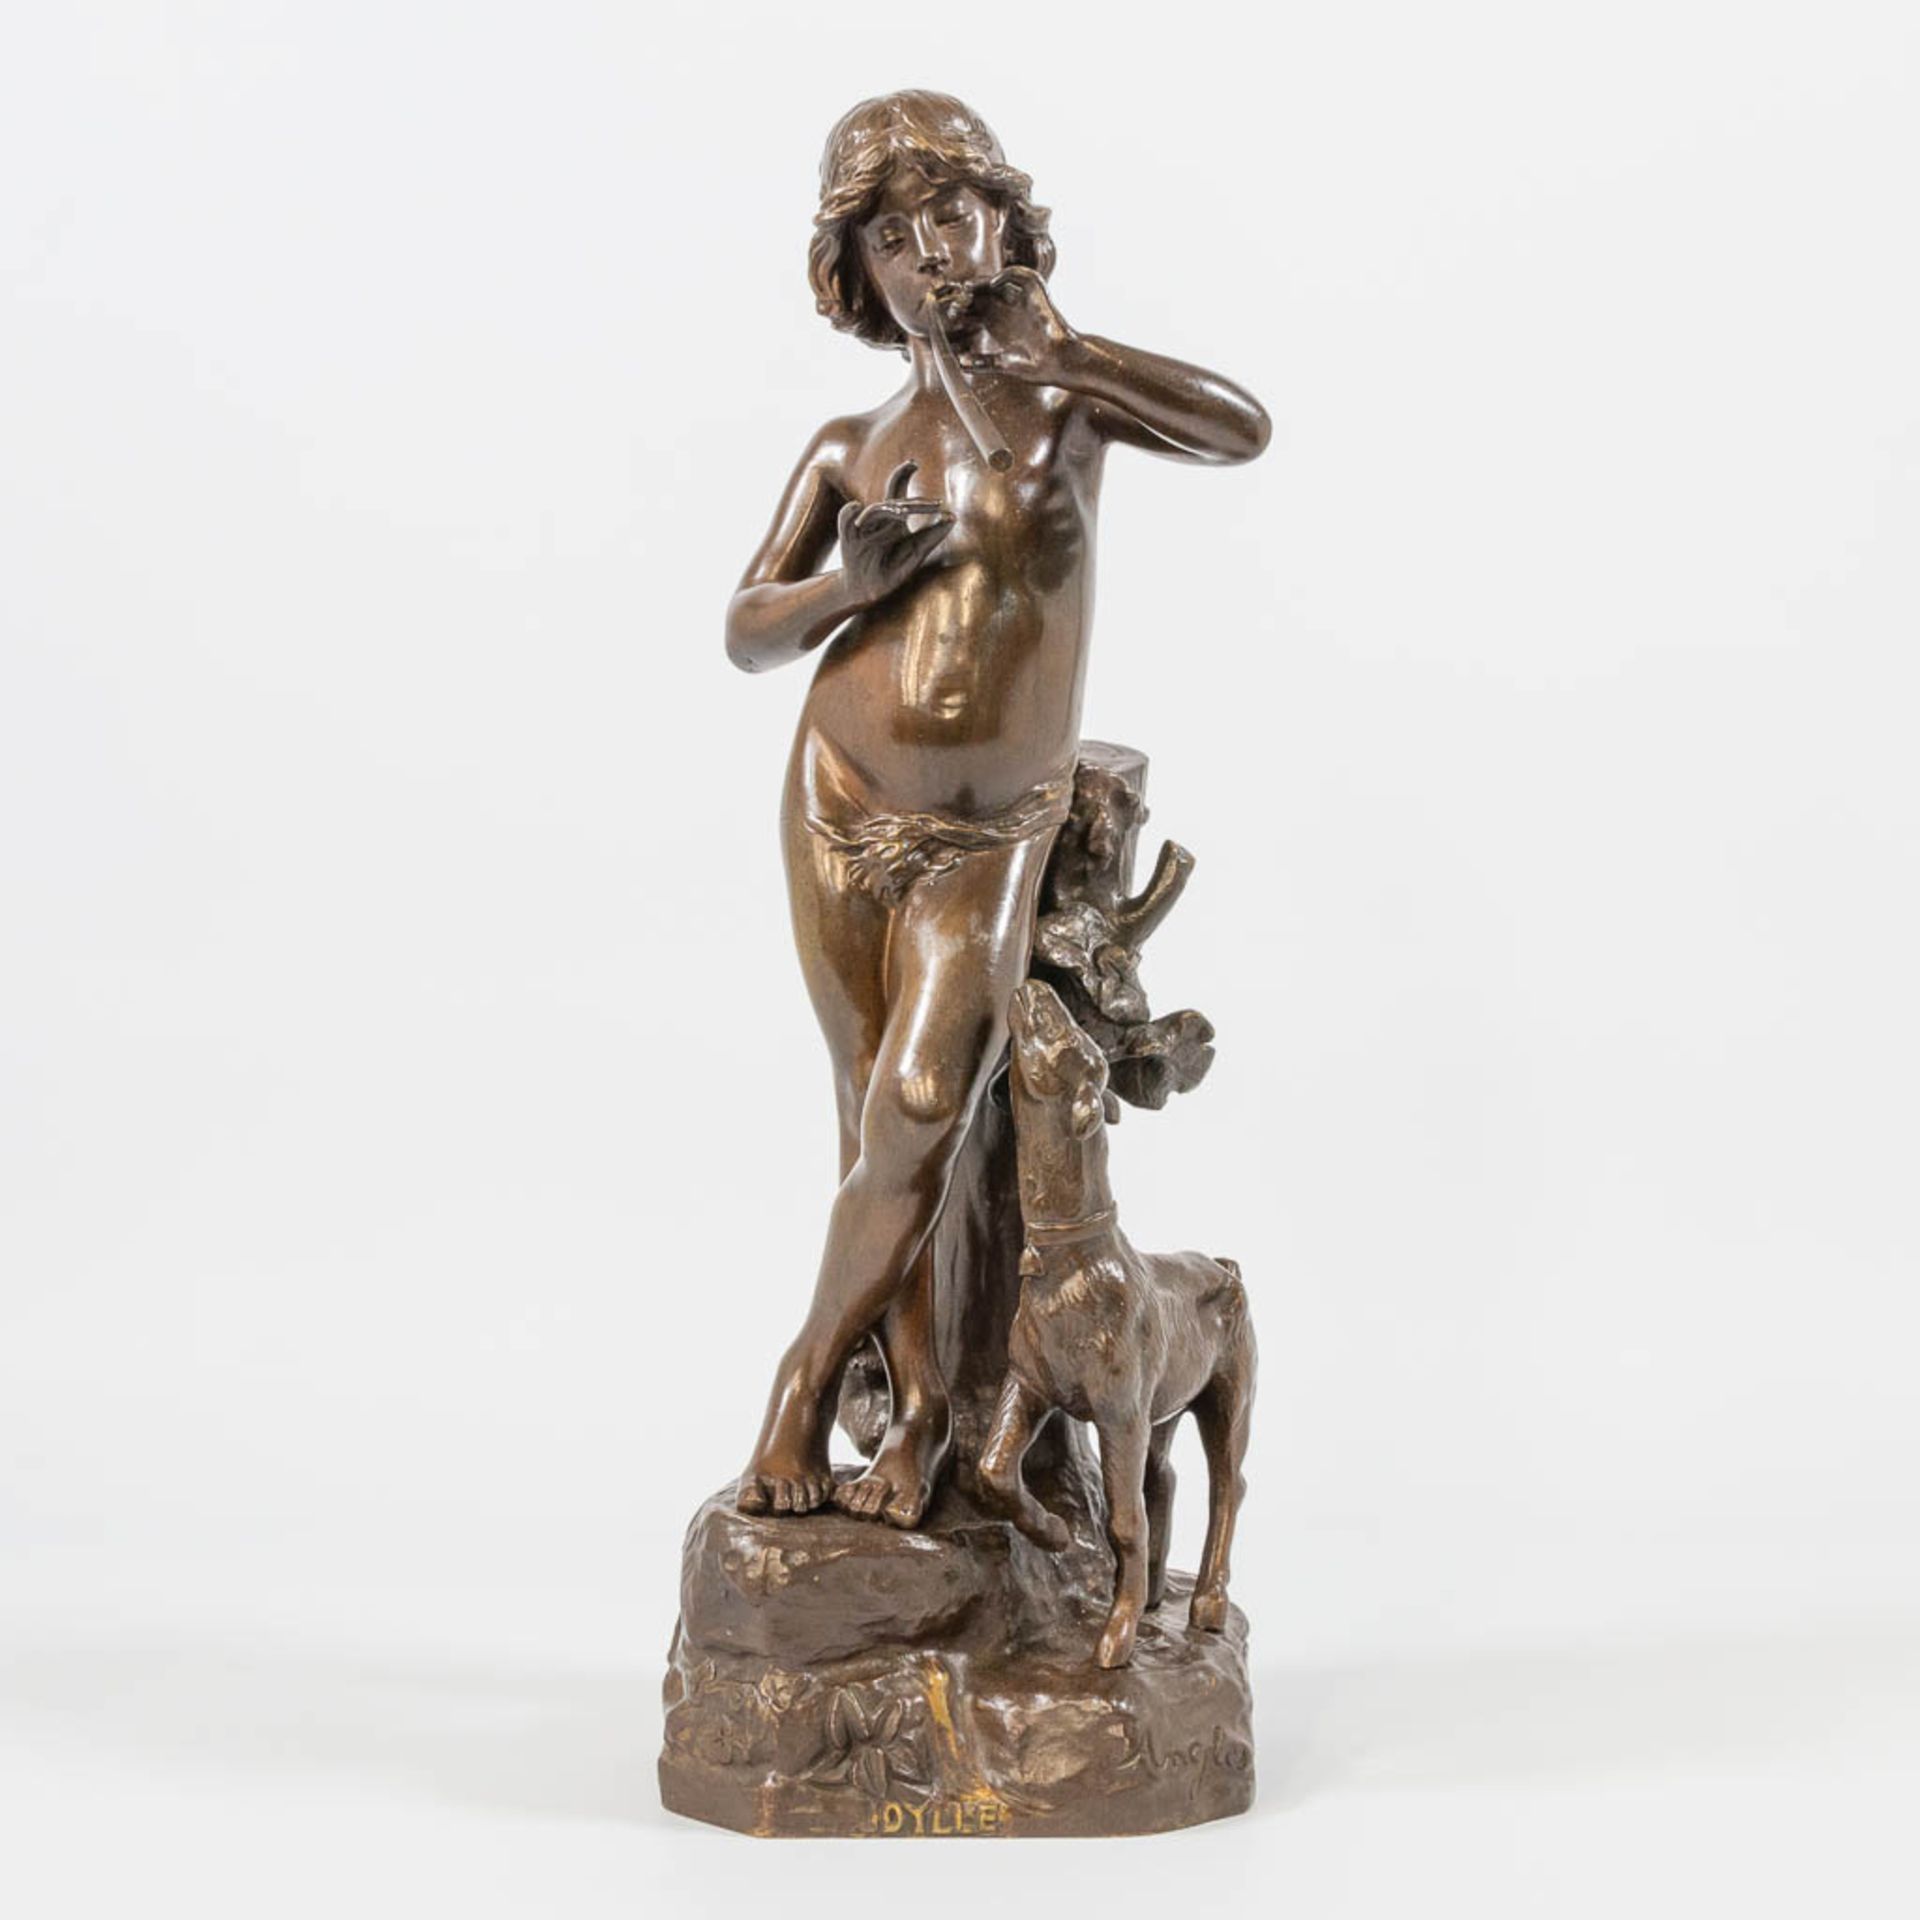 Joaquim ANGLES CANE (1859-c.1911) 'Idylle', a bronze statue, a man with a flute and goat